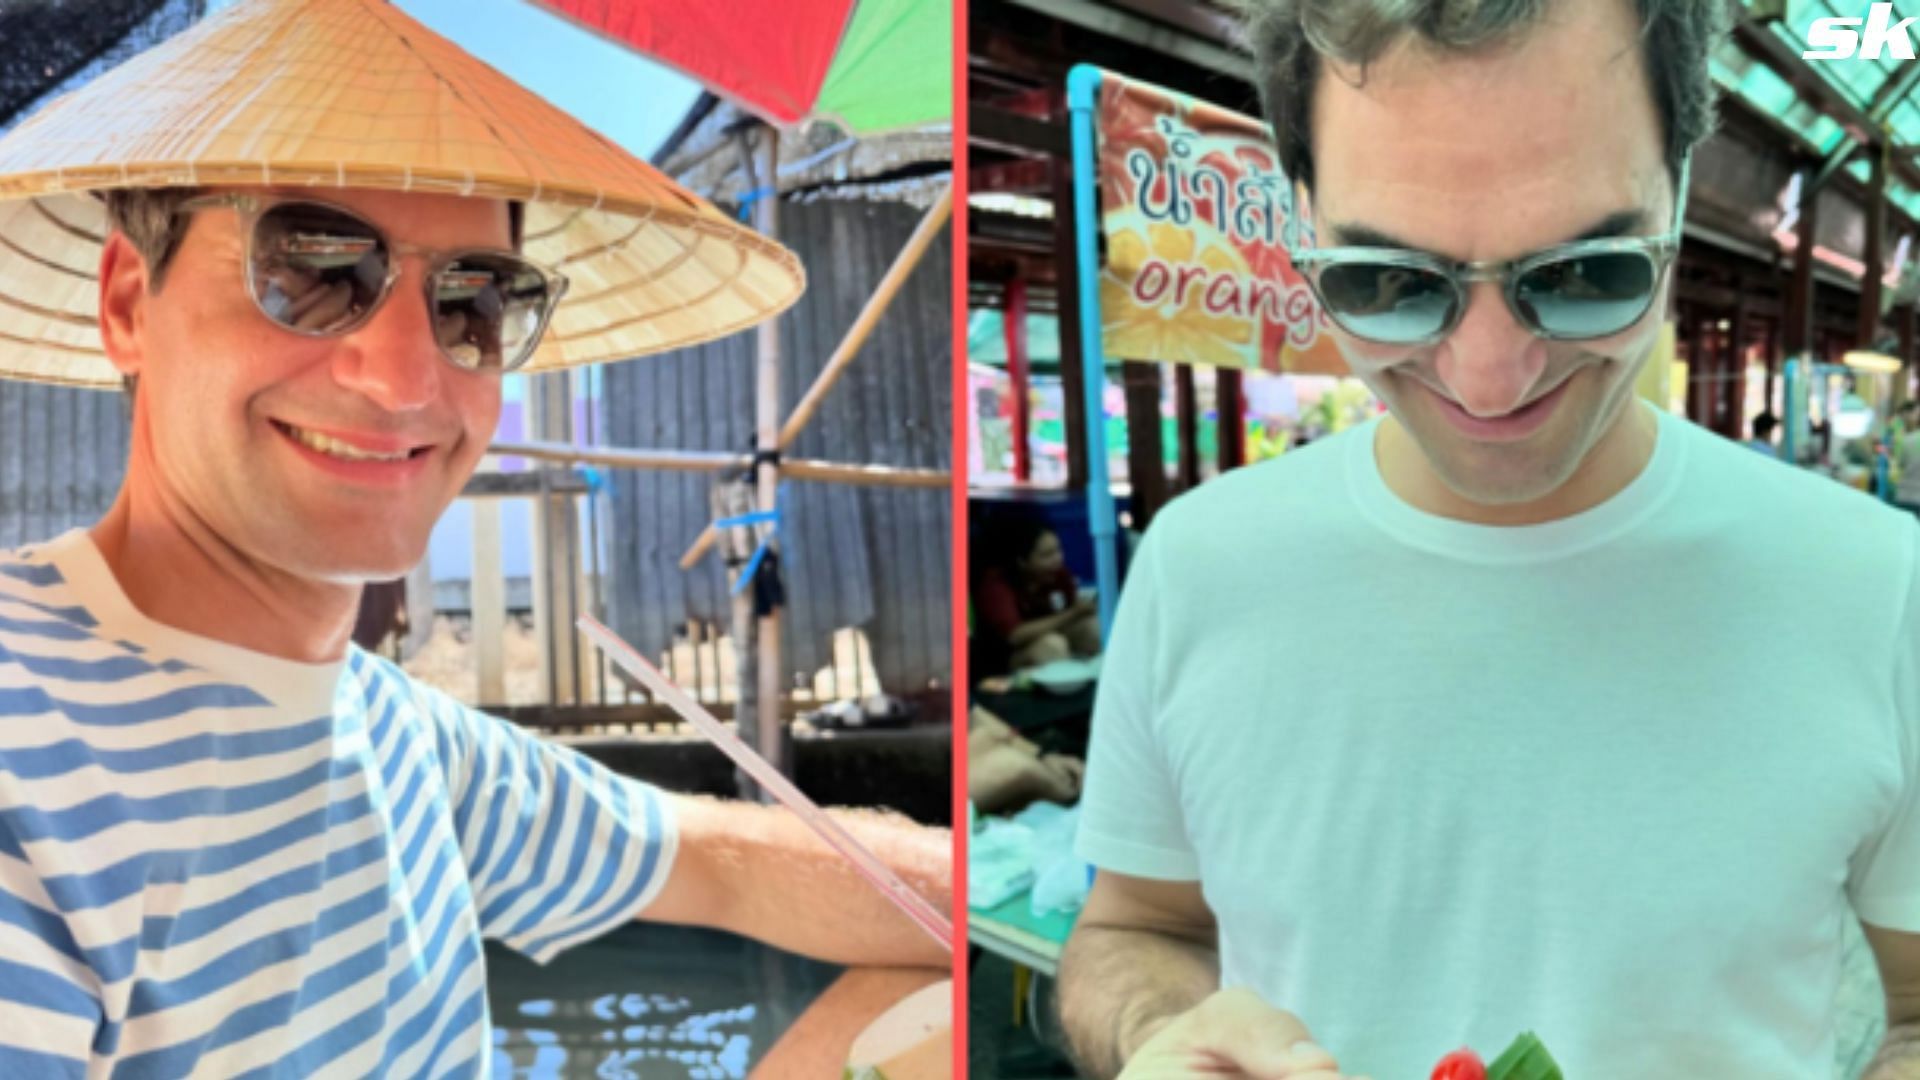 In Pictures: Roger Federer beams with joy wearing traditional bamboo hat, takes leisurely gondola ride & more during Thailand vacation